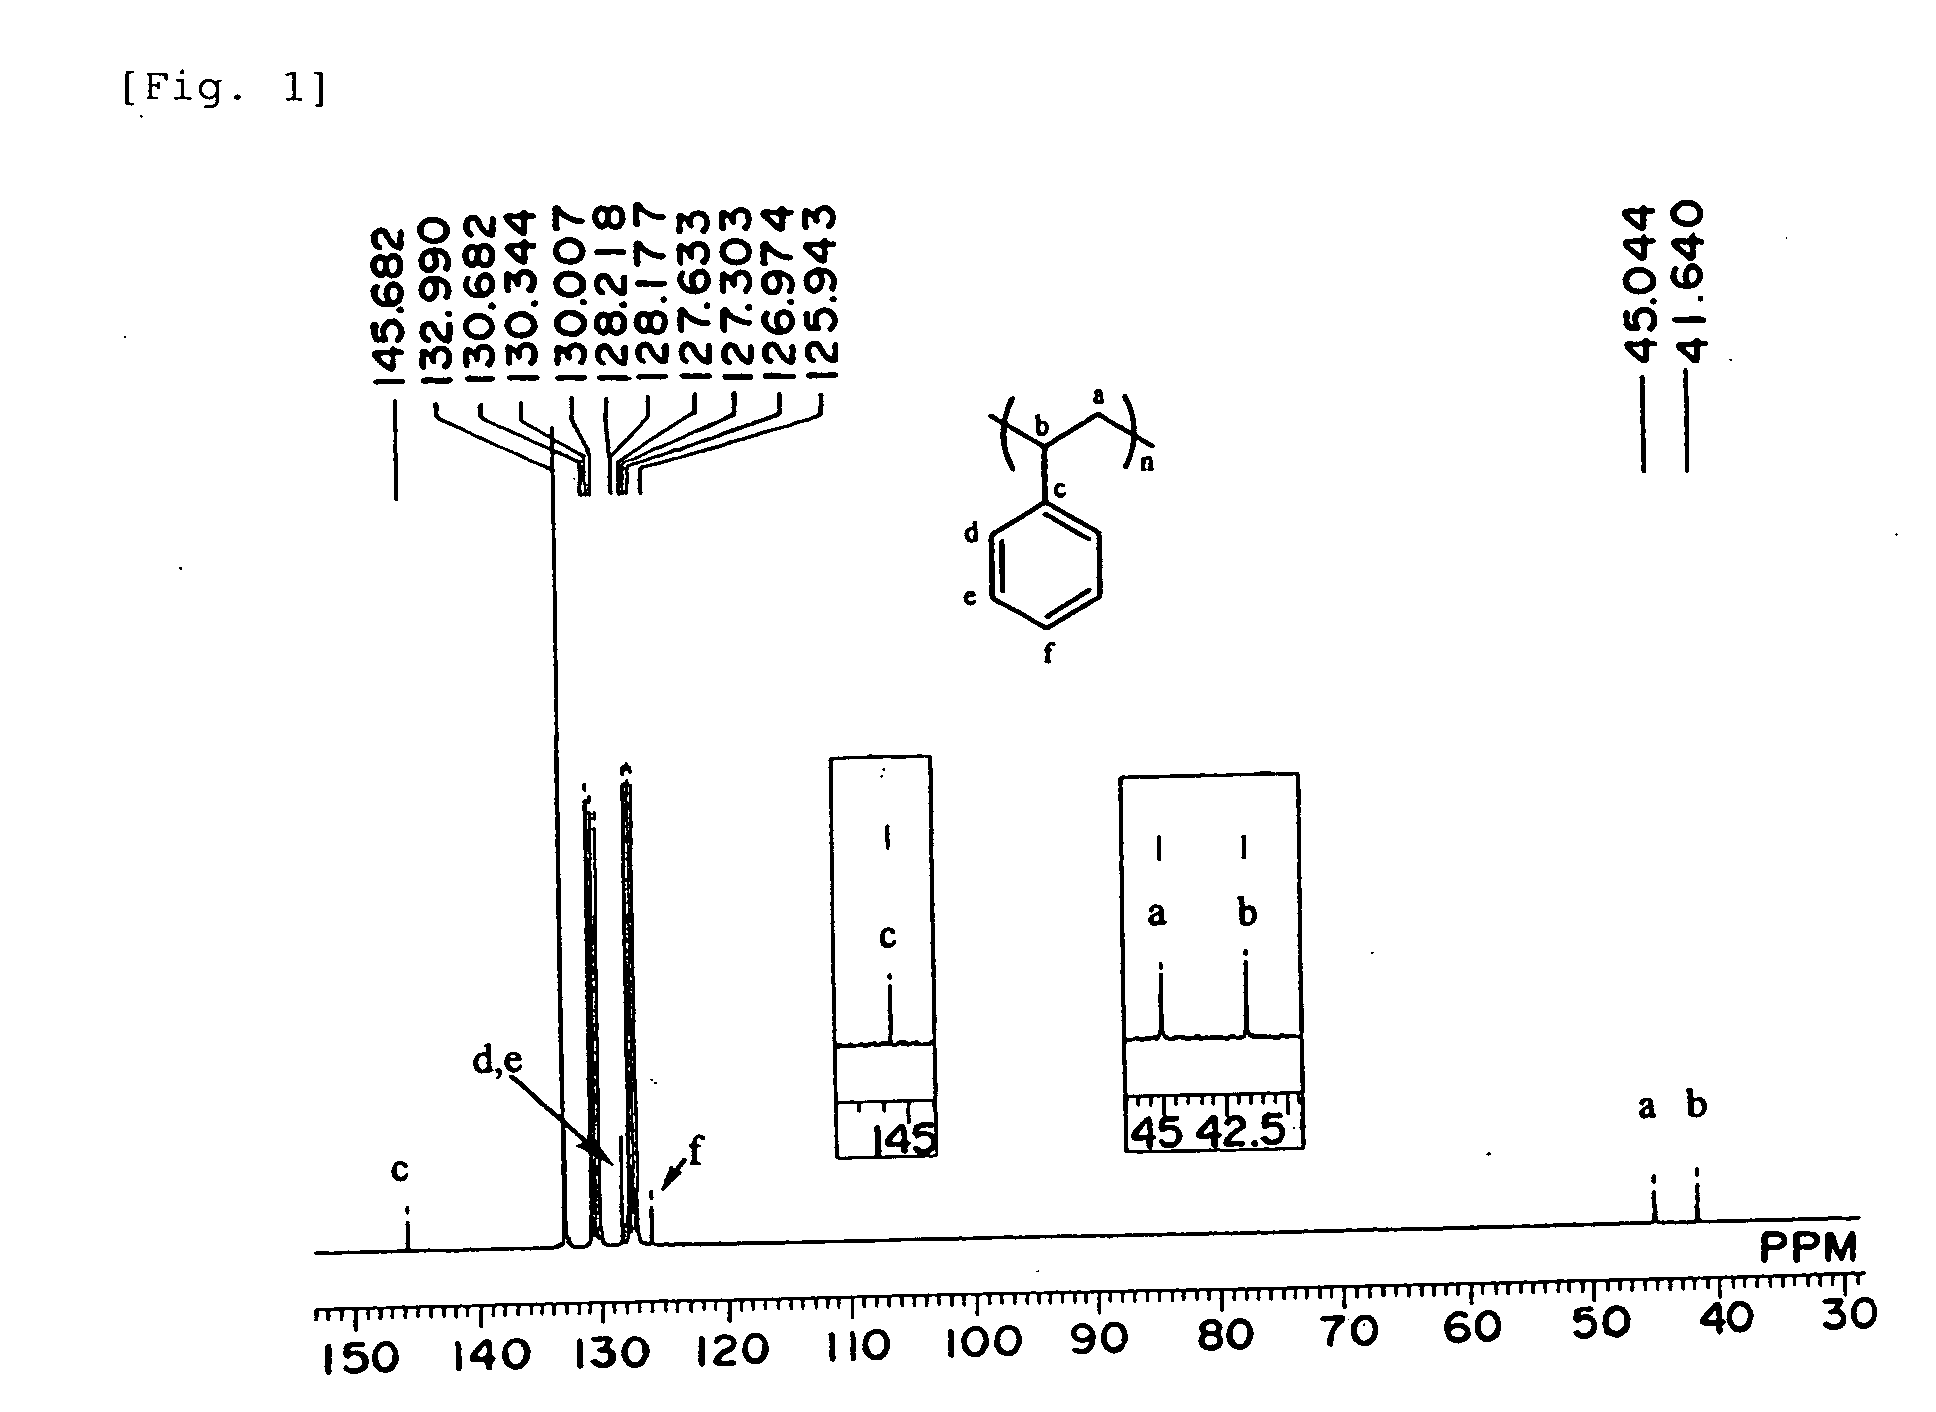 Polymerization Catalyst Compositions Containing Metallocene Complexes and Polymers Produced by Using the Same